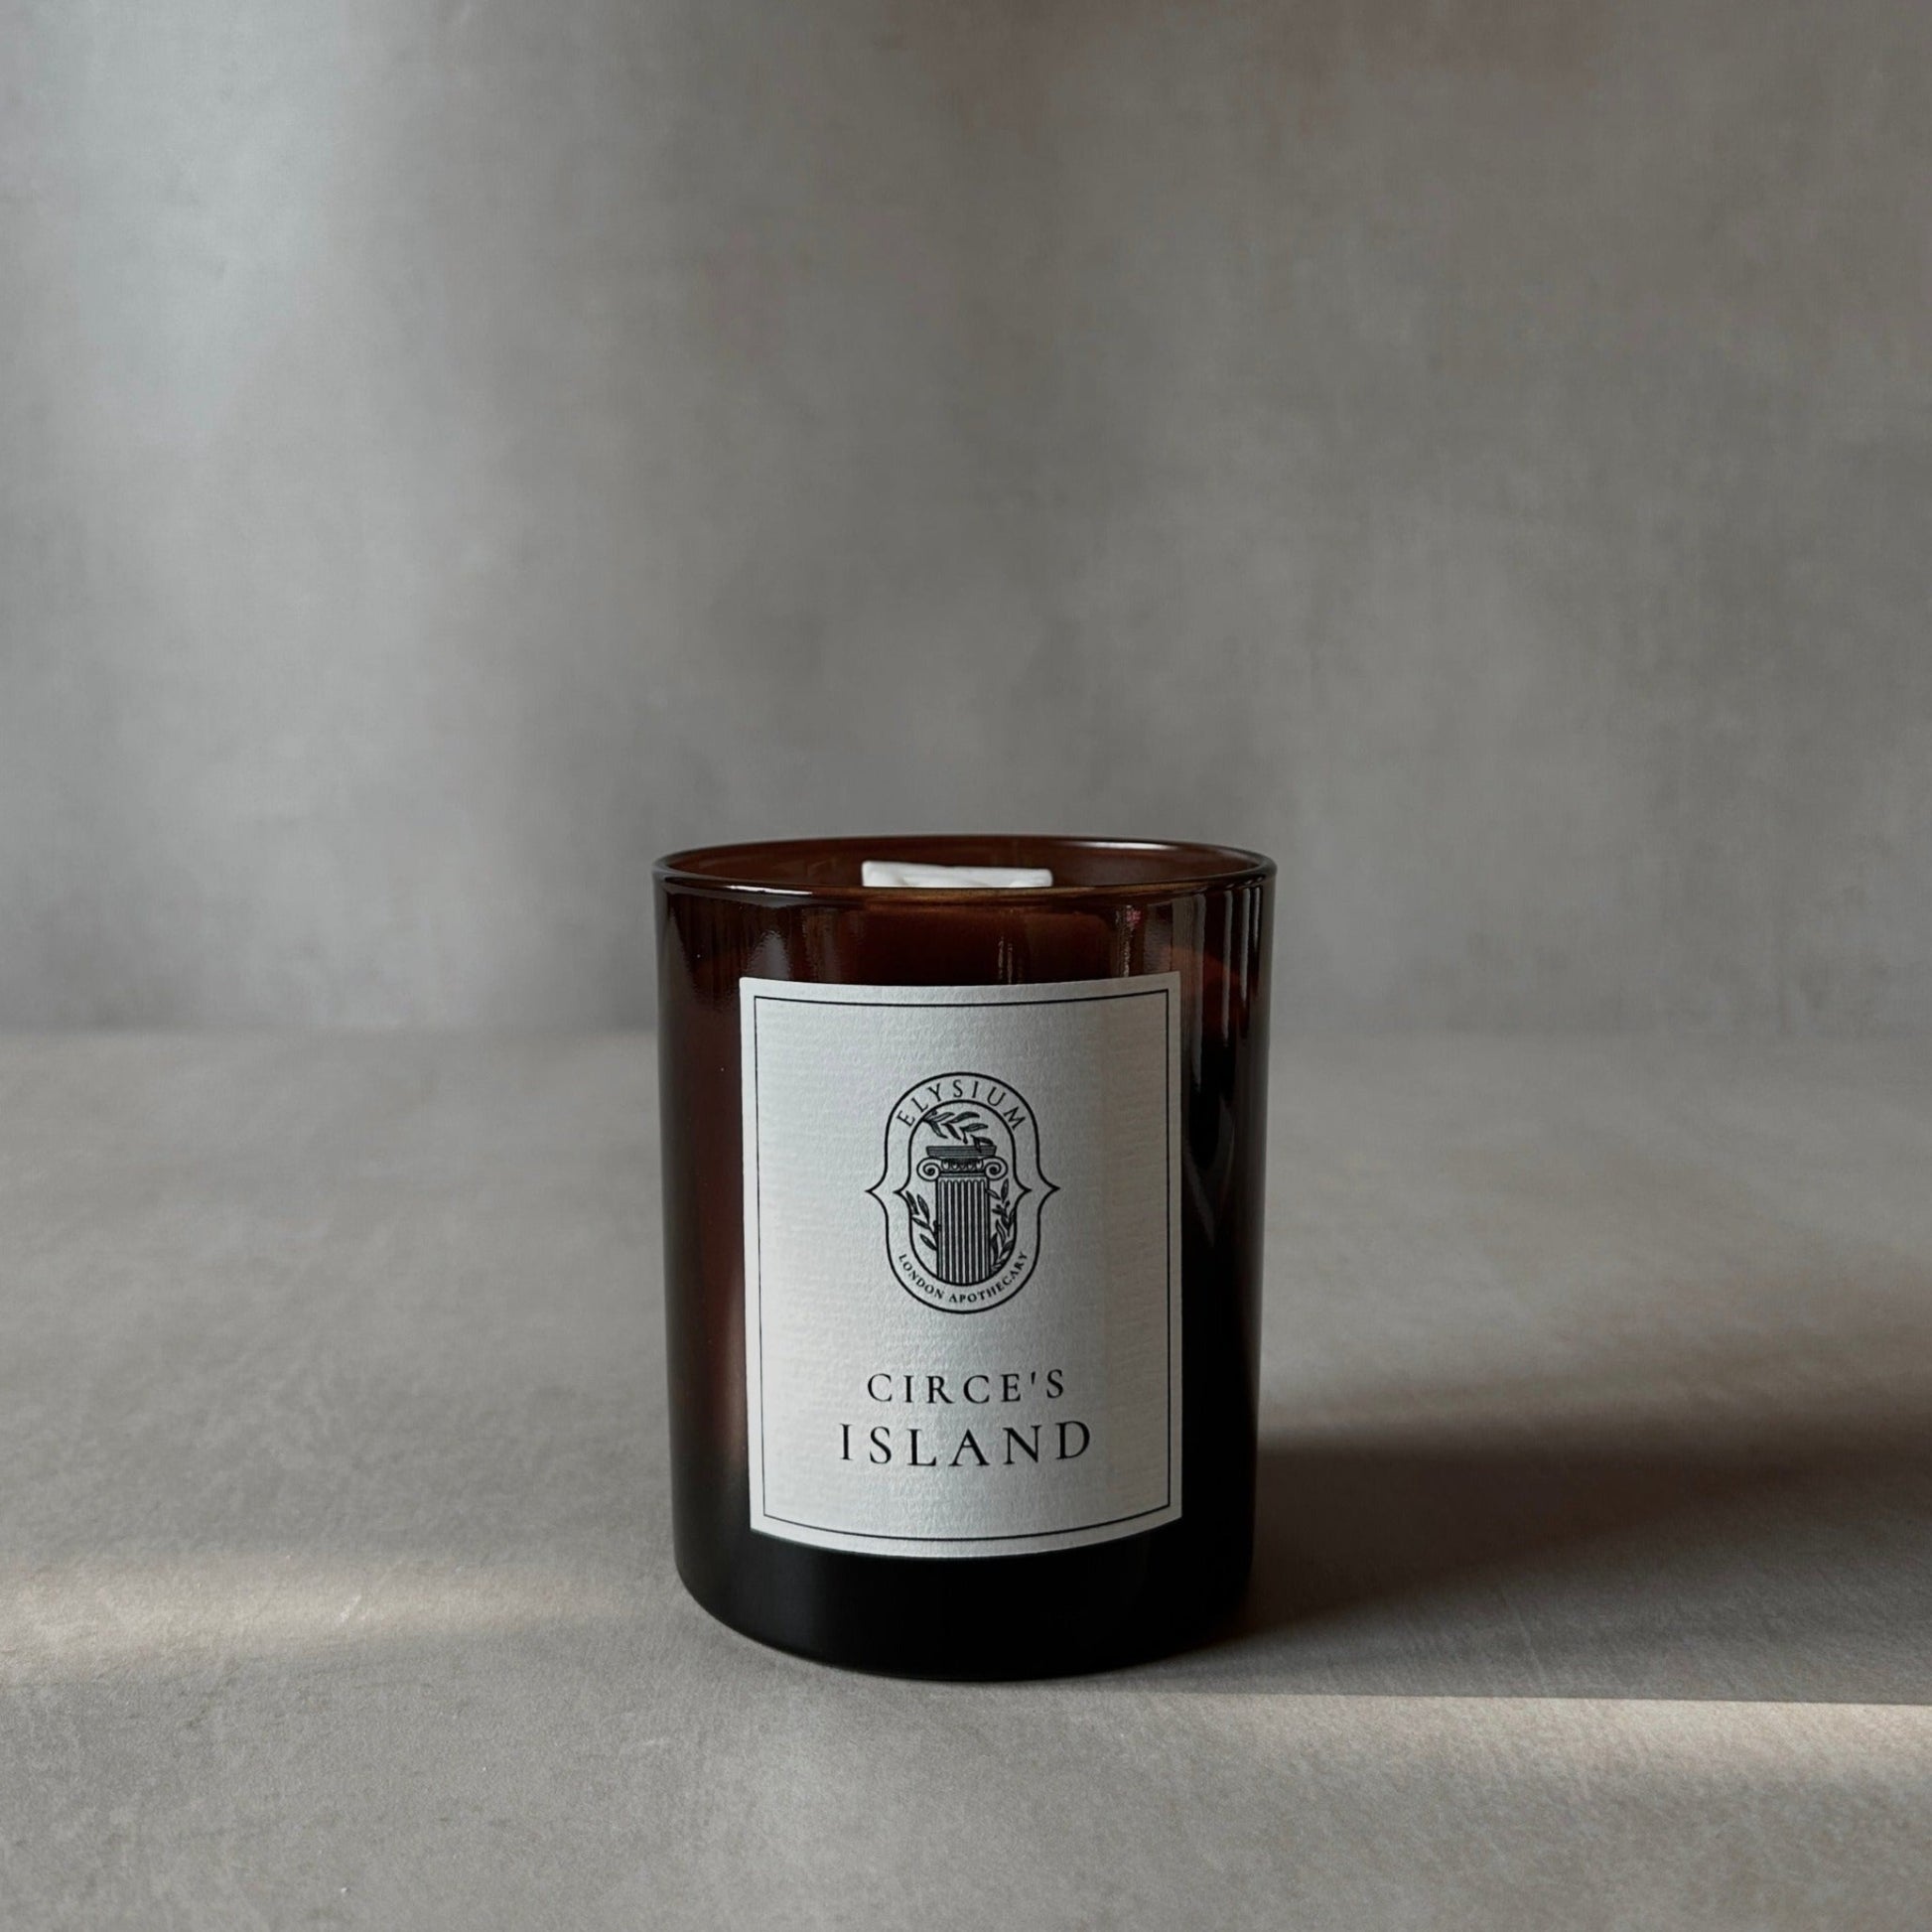 Circe's Island Scented Candle